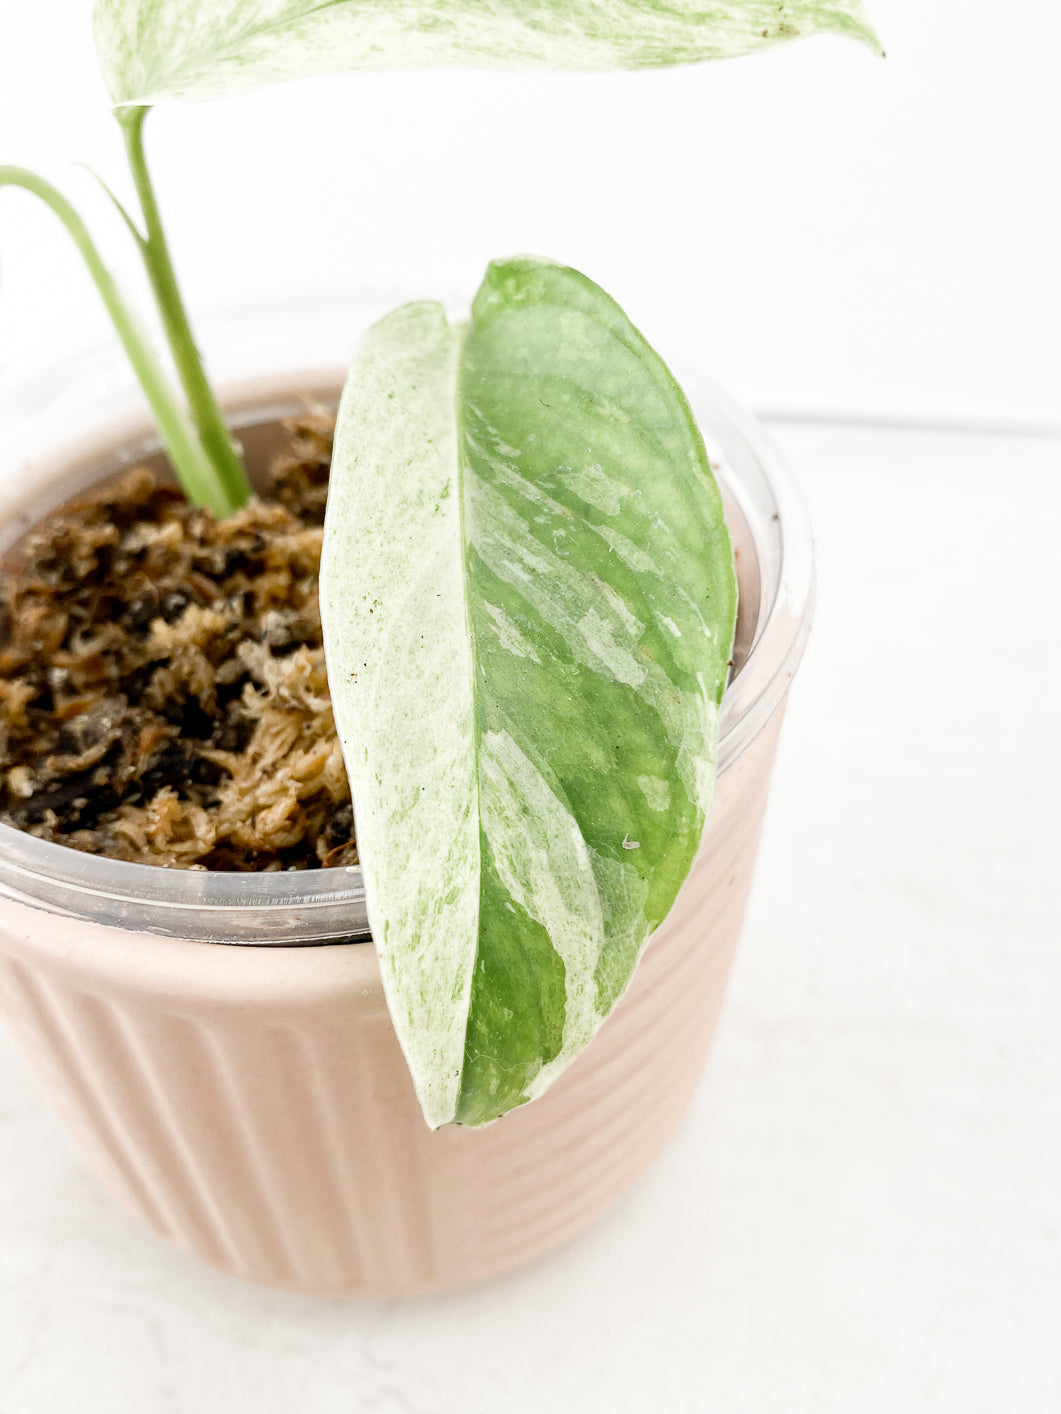 Monstera Laniata Variegated Rooting 3 leaves Top Cutting 1 sprout